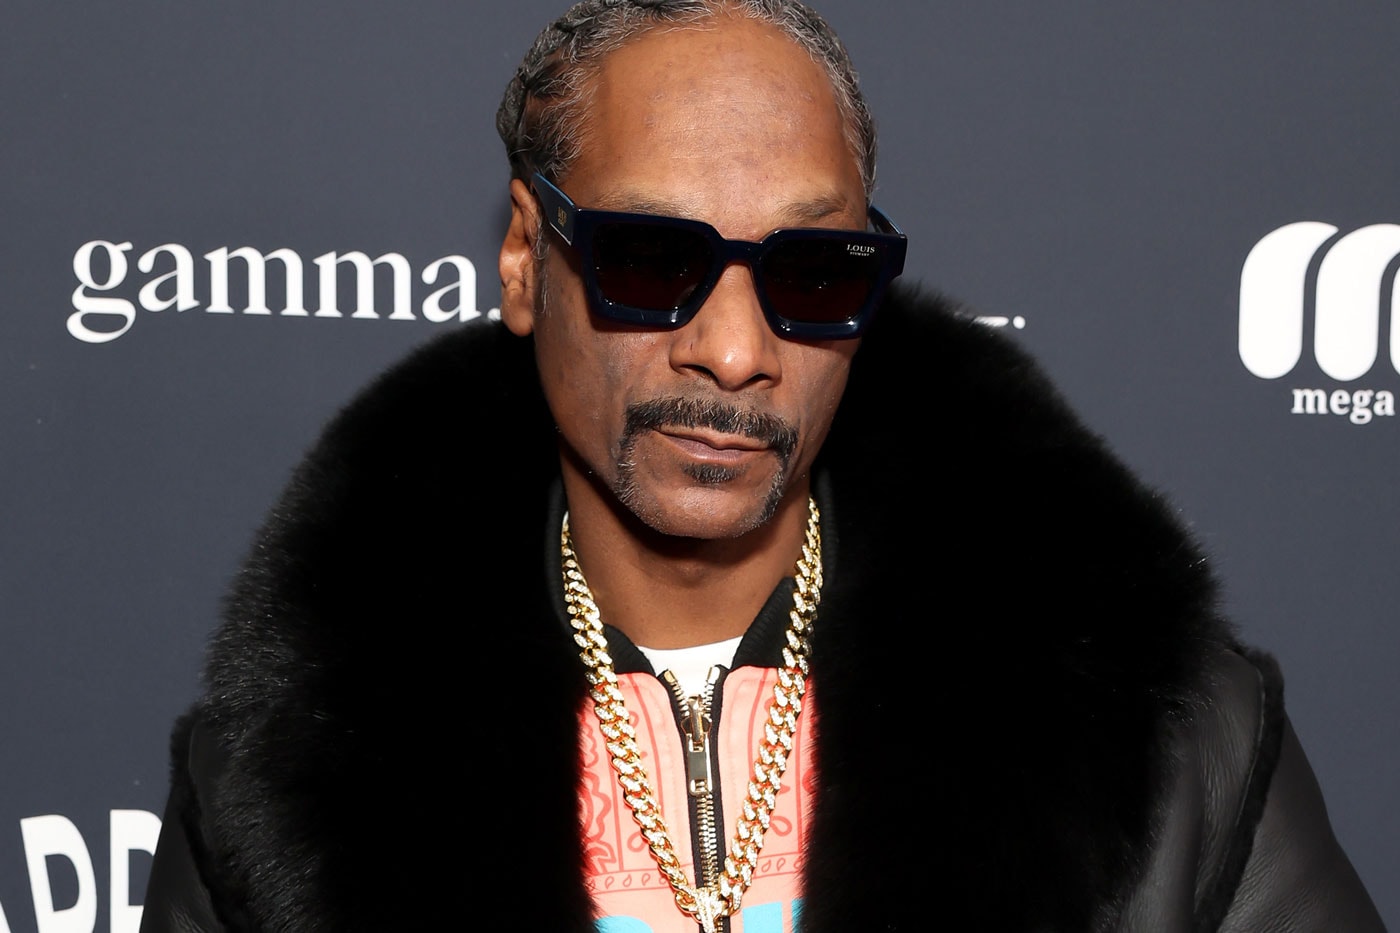 Snoop Dogg & Daz Dillinger Reconnect for New Album, Share its Lead Single